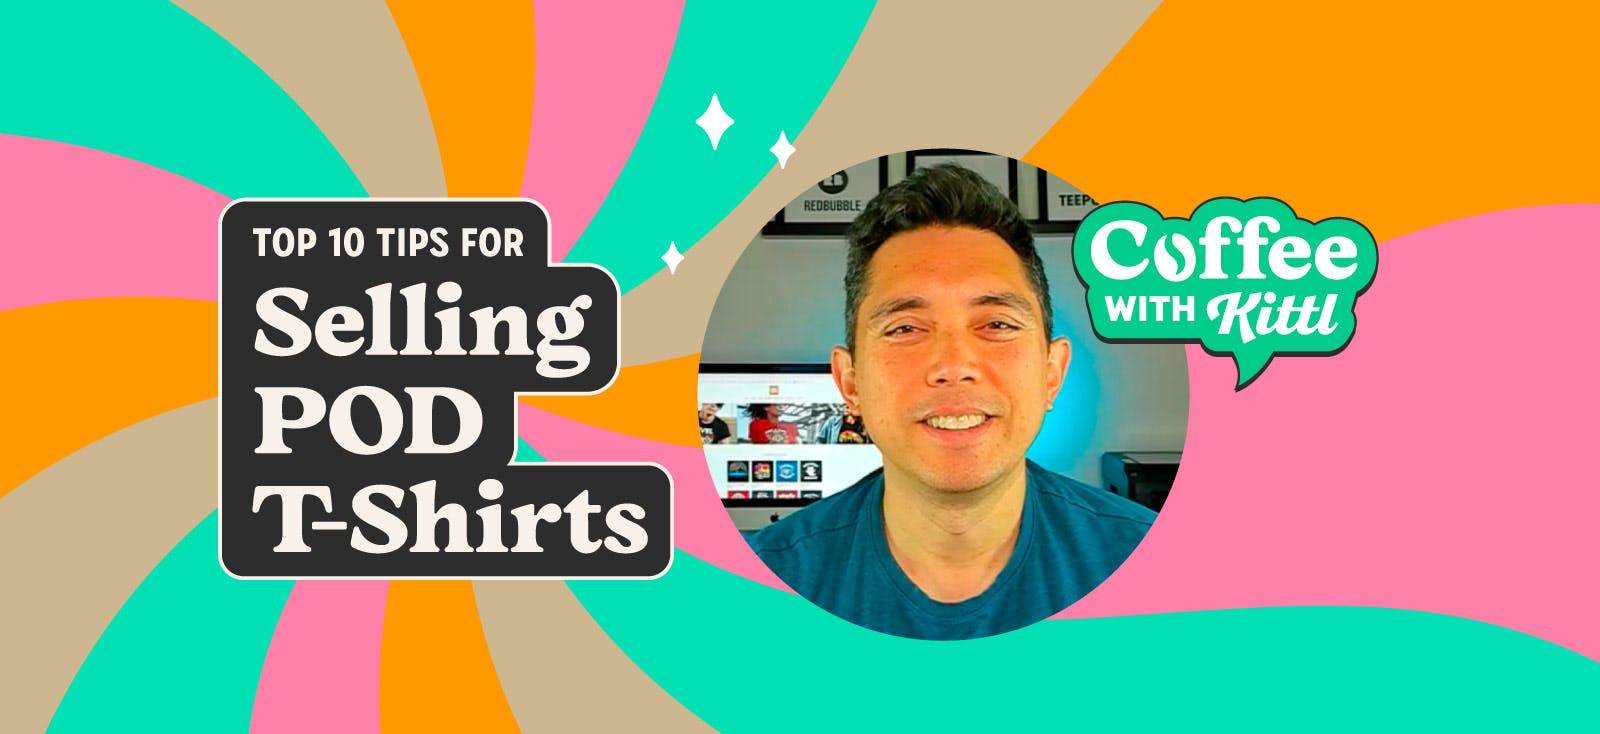 10 Tips For Selling POD T-Shirts